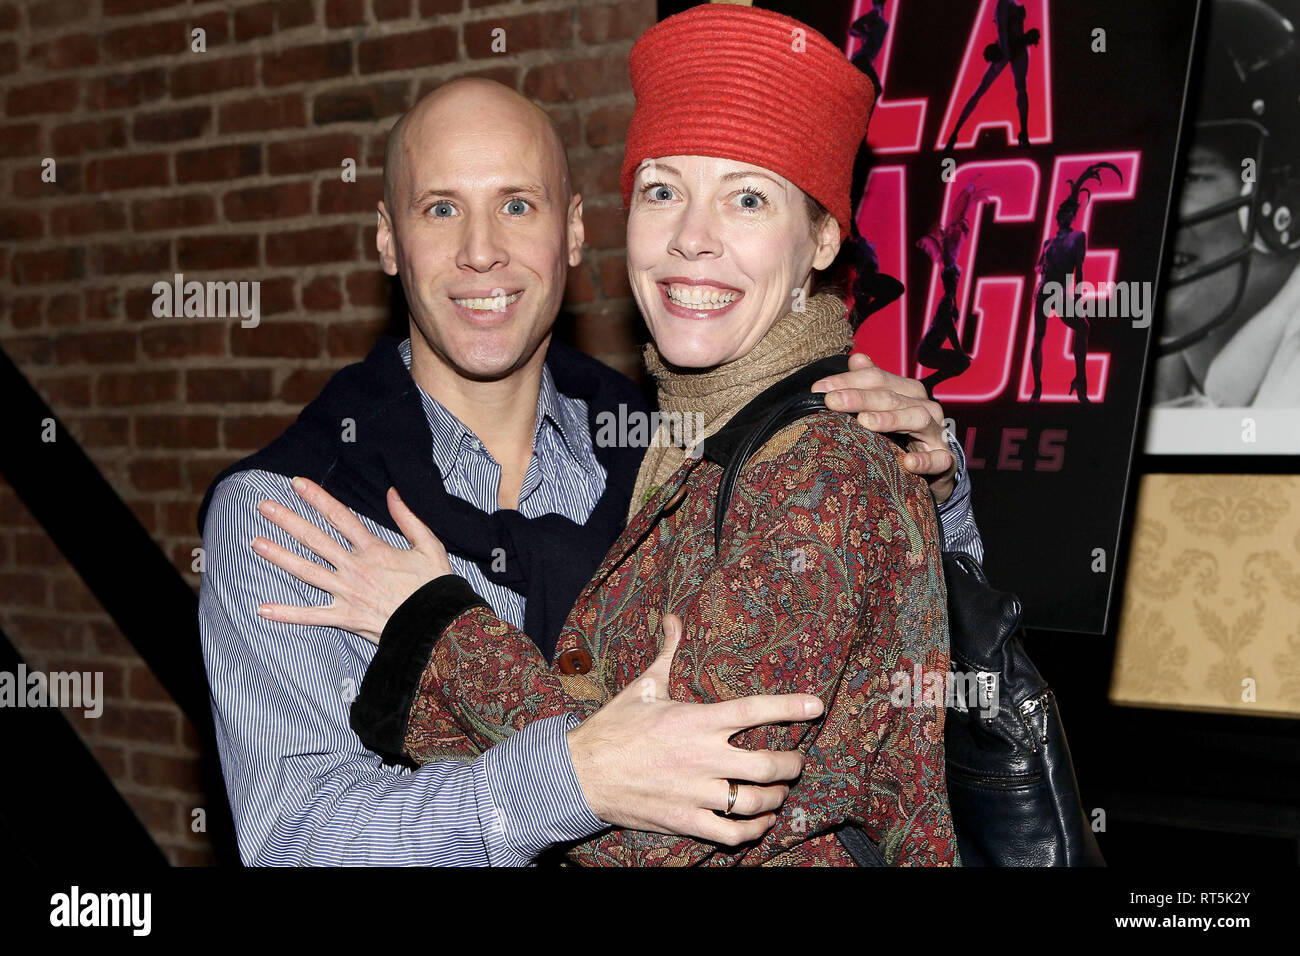 New York, USA. 13 Feb, 2011. Christophe Caballero, Veanne Cox at The Sunday, Feb 13, 2011 after party for Kelsey Grammer, Douglas Hodge, Robin De Jesus & Fred Applegate's final performance in 'La Cage Aux Folles' on Broadway at Hurley's Saloon in New York, USA. Credit: Steve Mack/S.D. Mack Pictures/Alamy Stock Photo